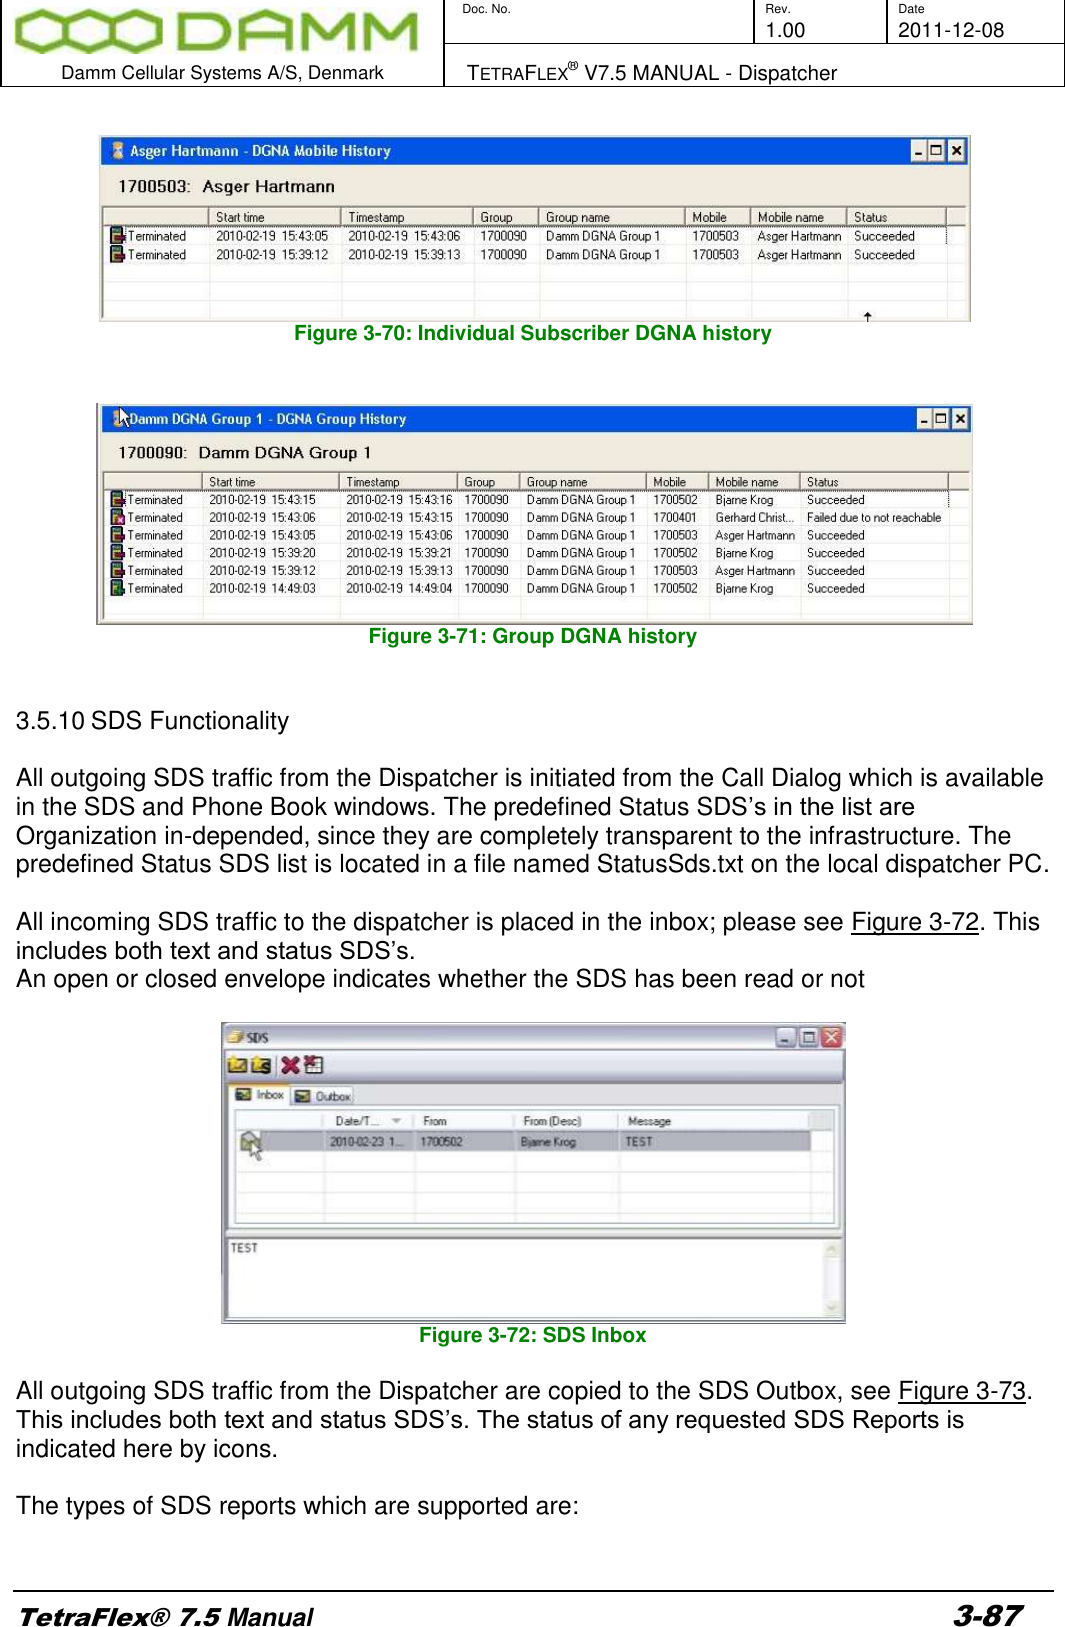        Doc. No. Rev. Date     1.00 2011-12-08  Damm Cellular Systems A/S, Denmark   TETRAFLEX® V7.5 MANUAL - Dispatcher  TetraFlex® 7.5 Manual 3-87   Figure 3-70: Individual Subscriber DGNA history    Figure 3-71: Group DGNA history   3.5.10 SDS Functionality  All outgoing SDS traffic from the Dispatcher is initiated from the Call Dialog which is available in the SDS and Phone Book windows. The predefined Status SDS’s in the list are Organization in-depended, since they are completely transparent to the infrastructure. The predefined Status SDS list is located in a file named StatusSds.txt on the local dispatcher PC.   All incoming SDS traffic to the dispatcher is placed in the inbox; please see Figure 3-72. This includes both text and status SDS’s. An open or closed envelope indicates whether the SDS has been read or not   Figure 3-72: SDS Inbox  All outgoing SDS traffic from the Dispatcher are copied to the SDS Outbox, see Figure 3-73. This includes both text and status SDS’s. The status of any requested SDS Reports is indicated here by icons.   The types of SDS reports which are supported are:  